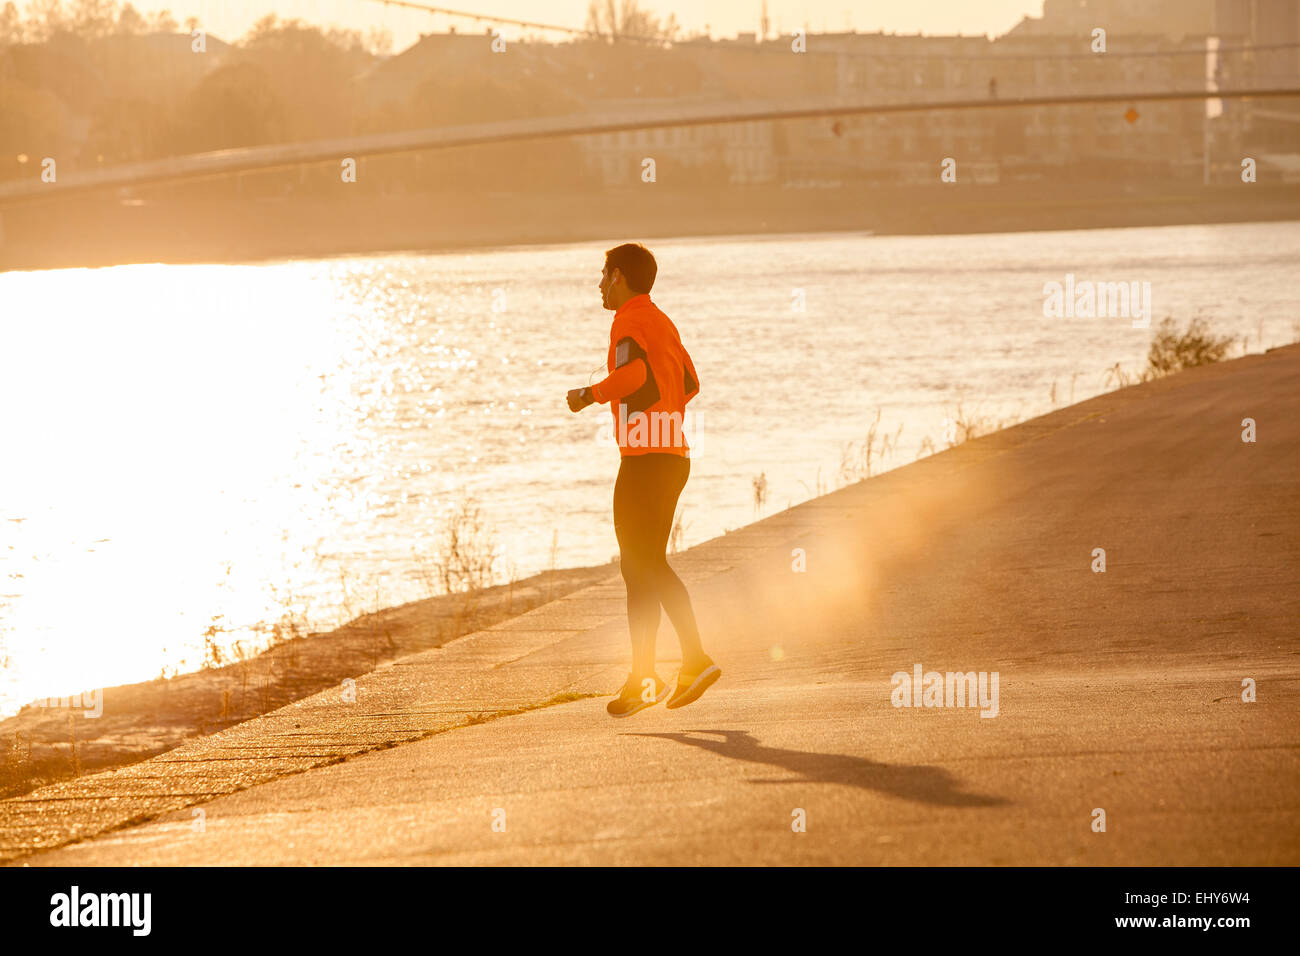 Male runner warming up at sunset Stock Photo